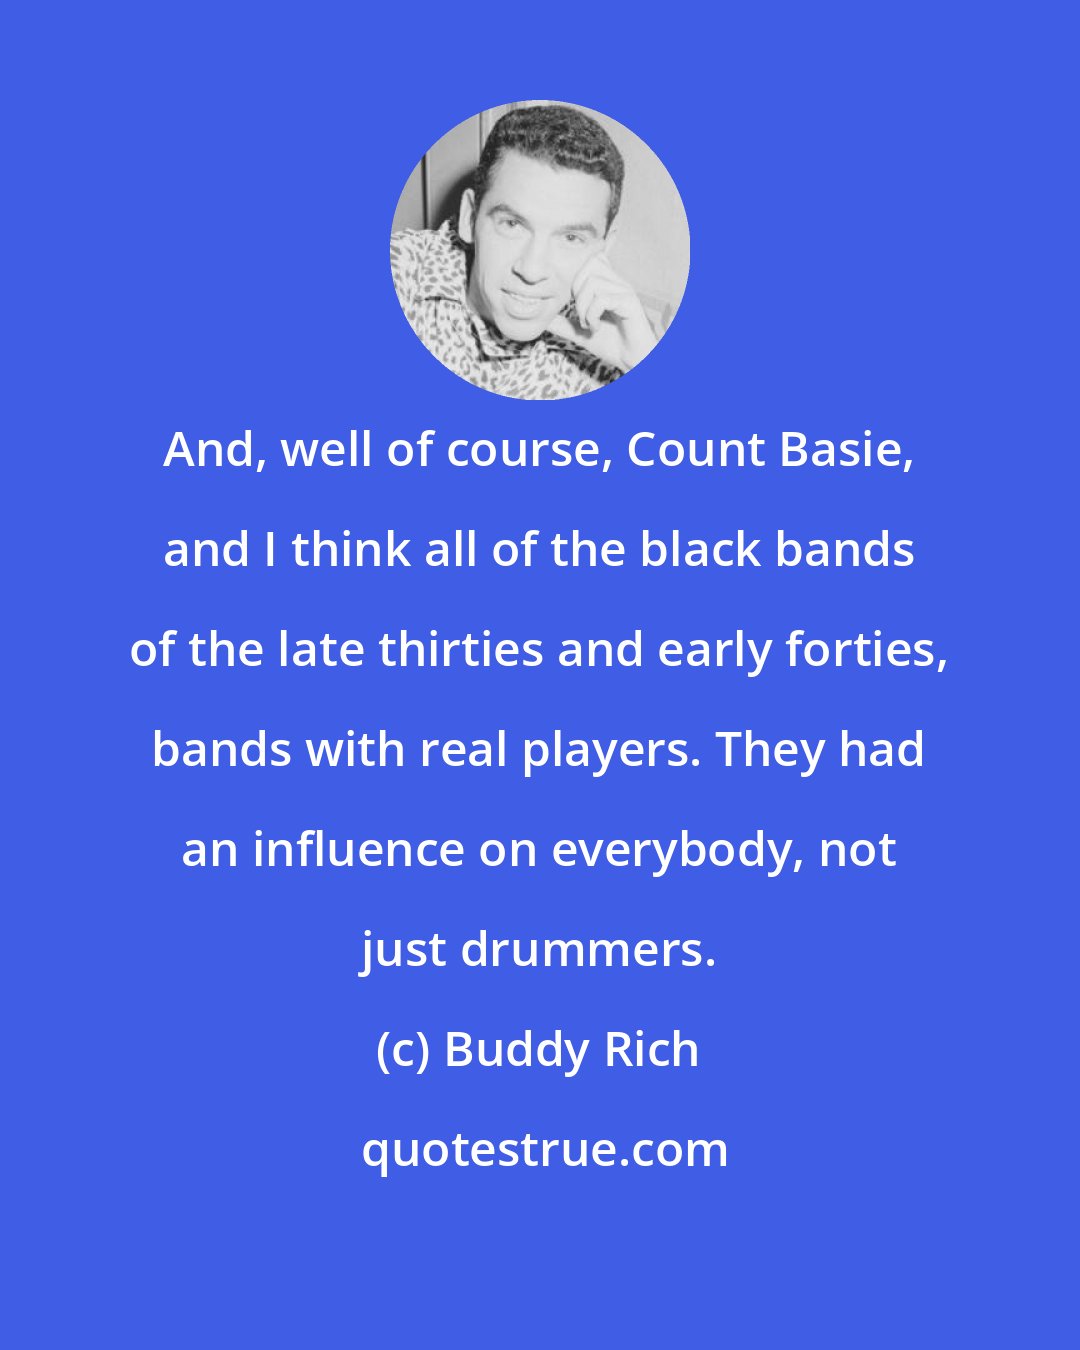 Buddy Rich: And, well of course, Count Basie, and I think all of the black bands of the late thirties and early forties, bands with real players. They had an influence on everybody, not just drummers.